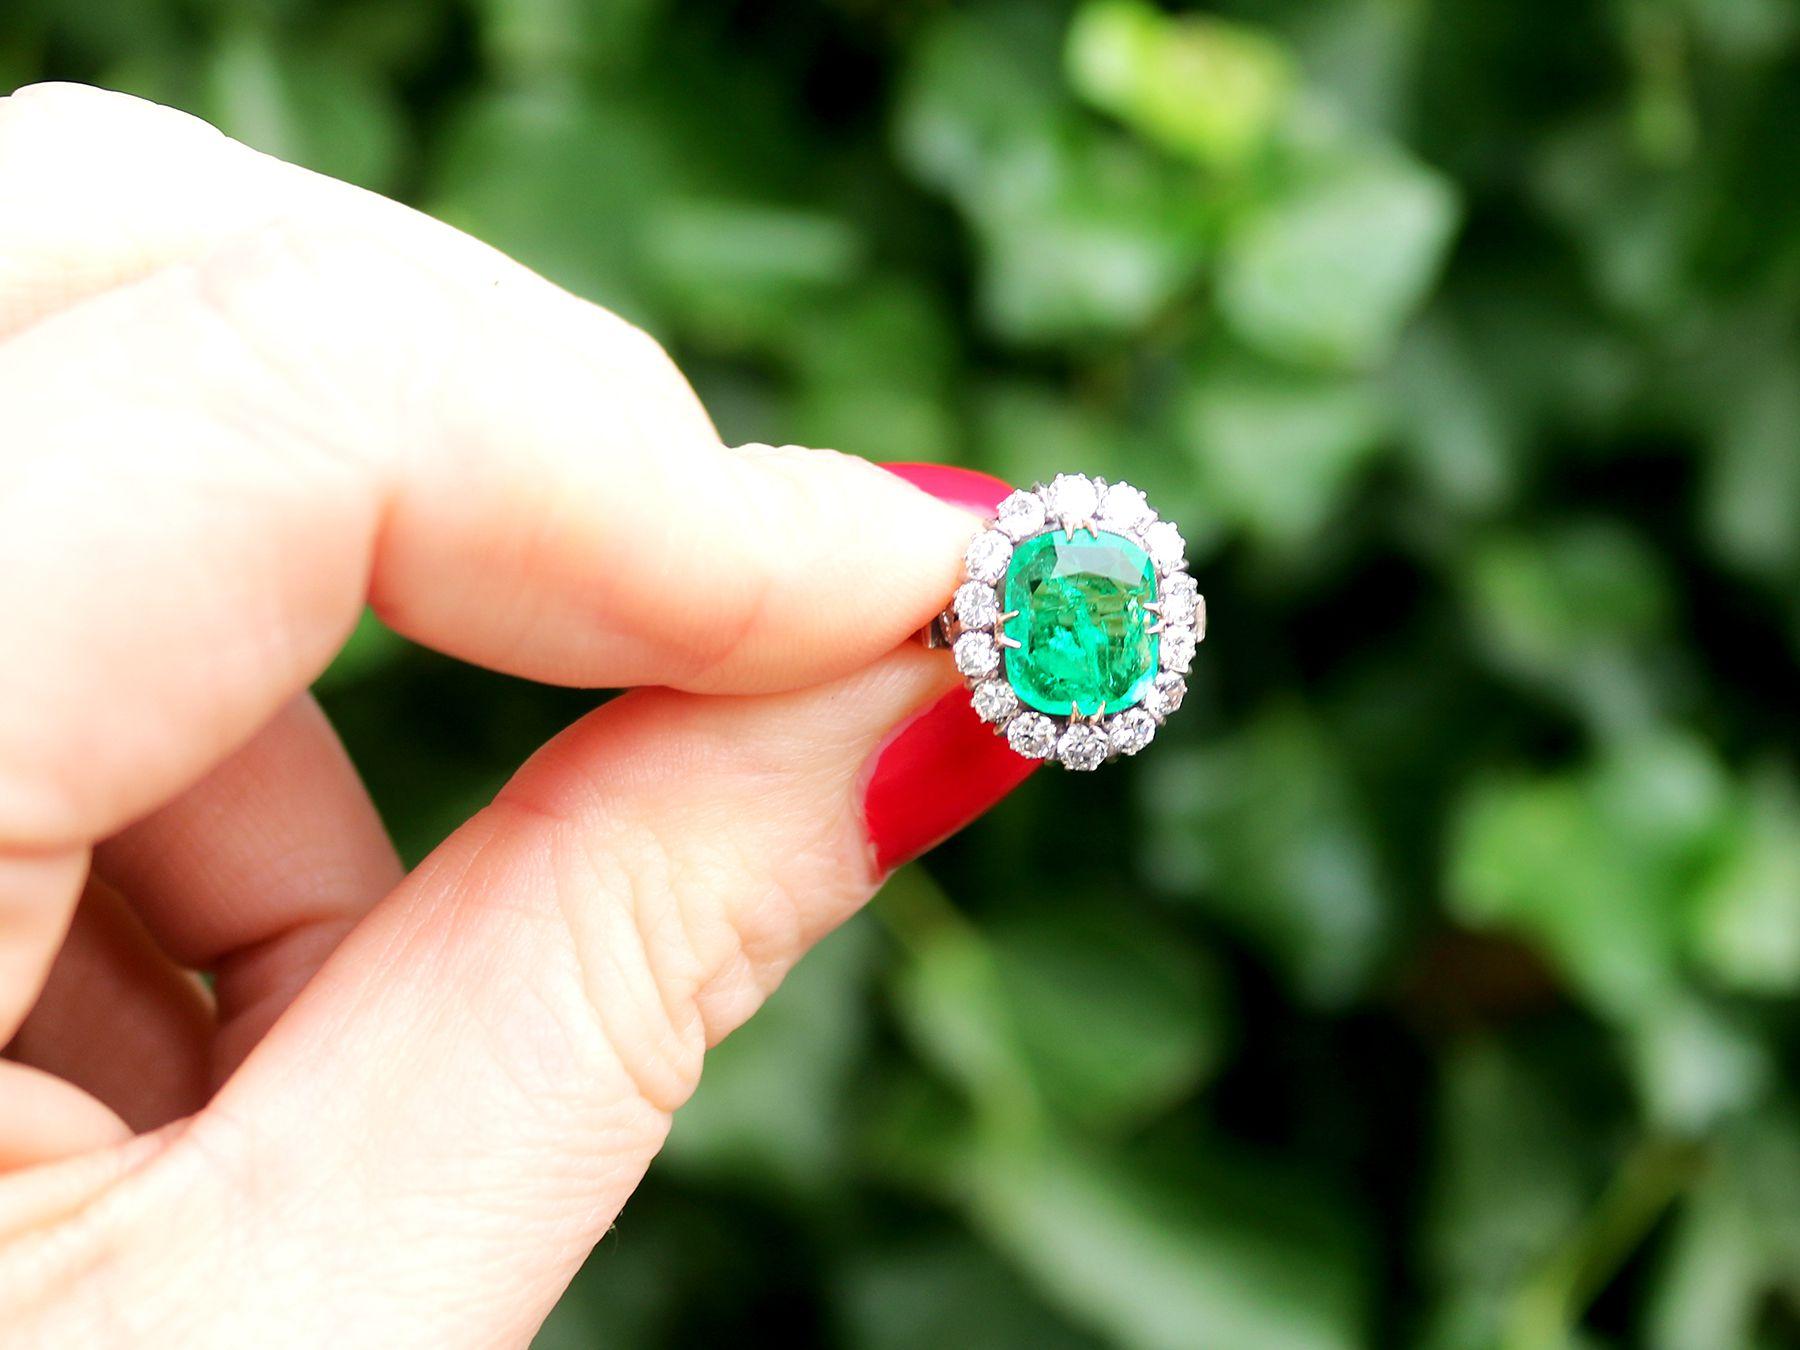 A stunning and impressive vintage 1.74 carat Colombian emerald and 0.80 carat diamond, 18 karat yellow gold, 18 karat white gold set ring; an addition to our antique jewelry collections

This stunning vintage oval cut emerald and diamond ring has